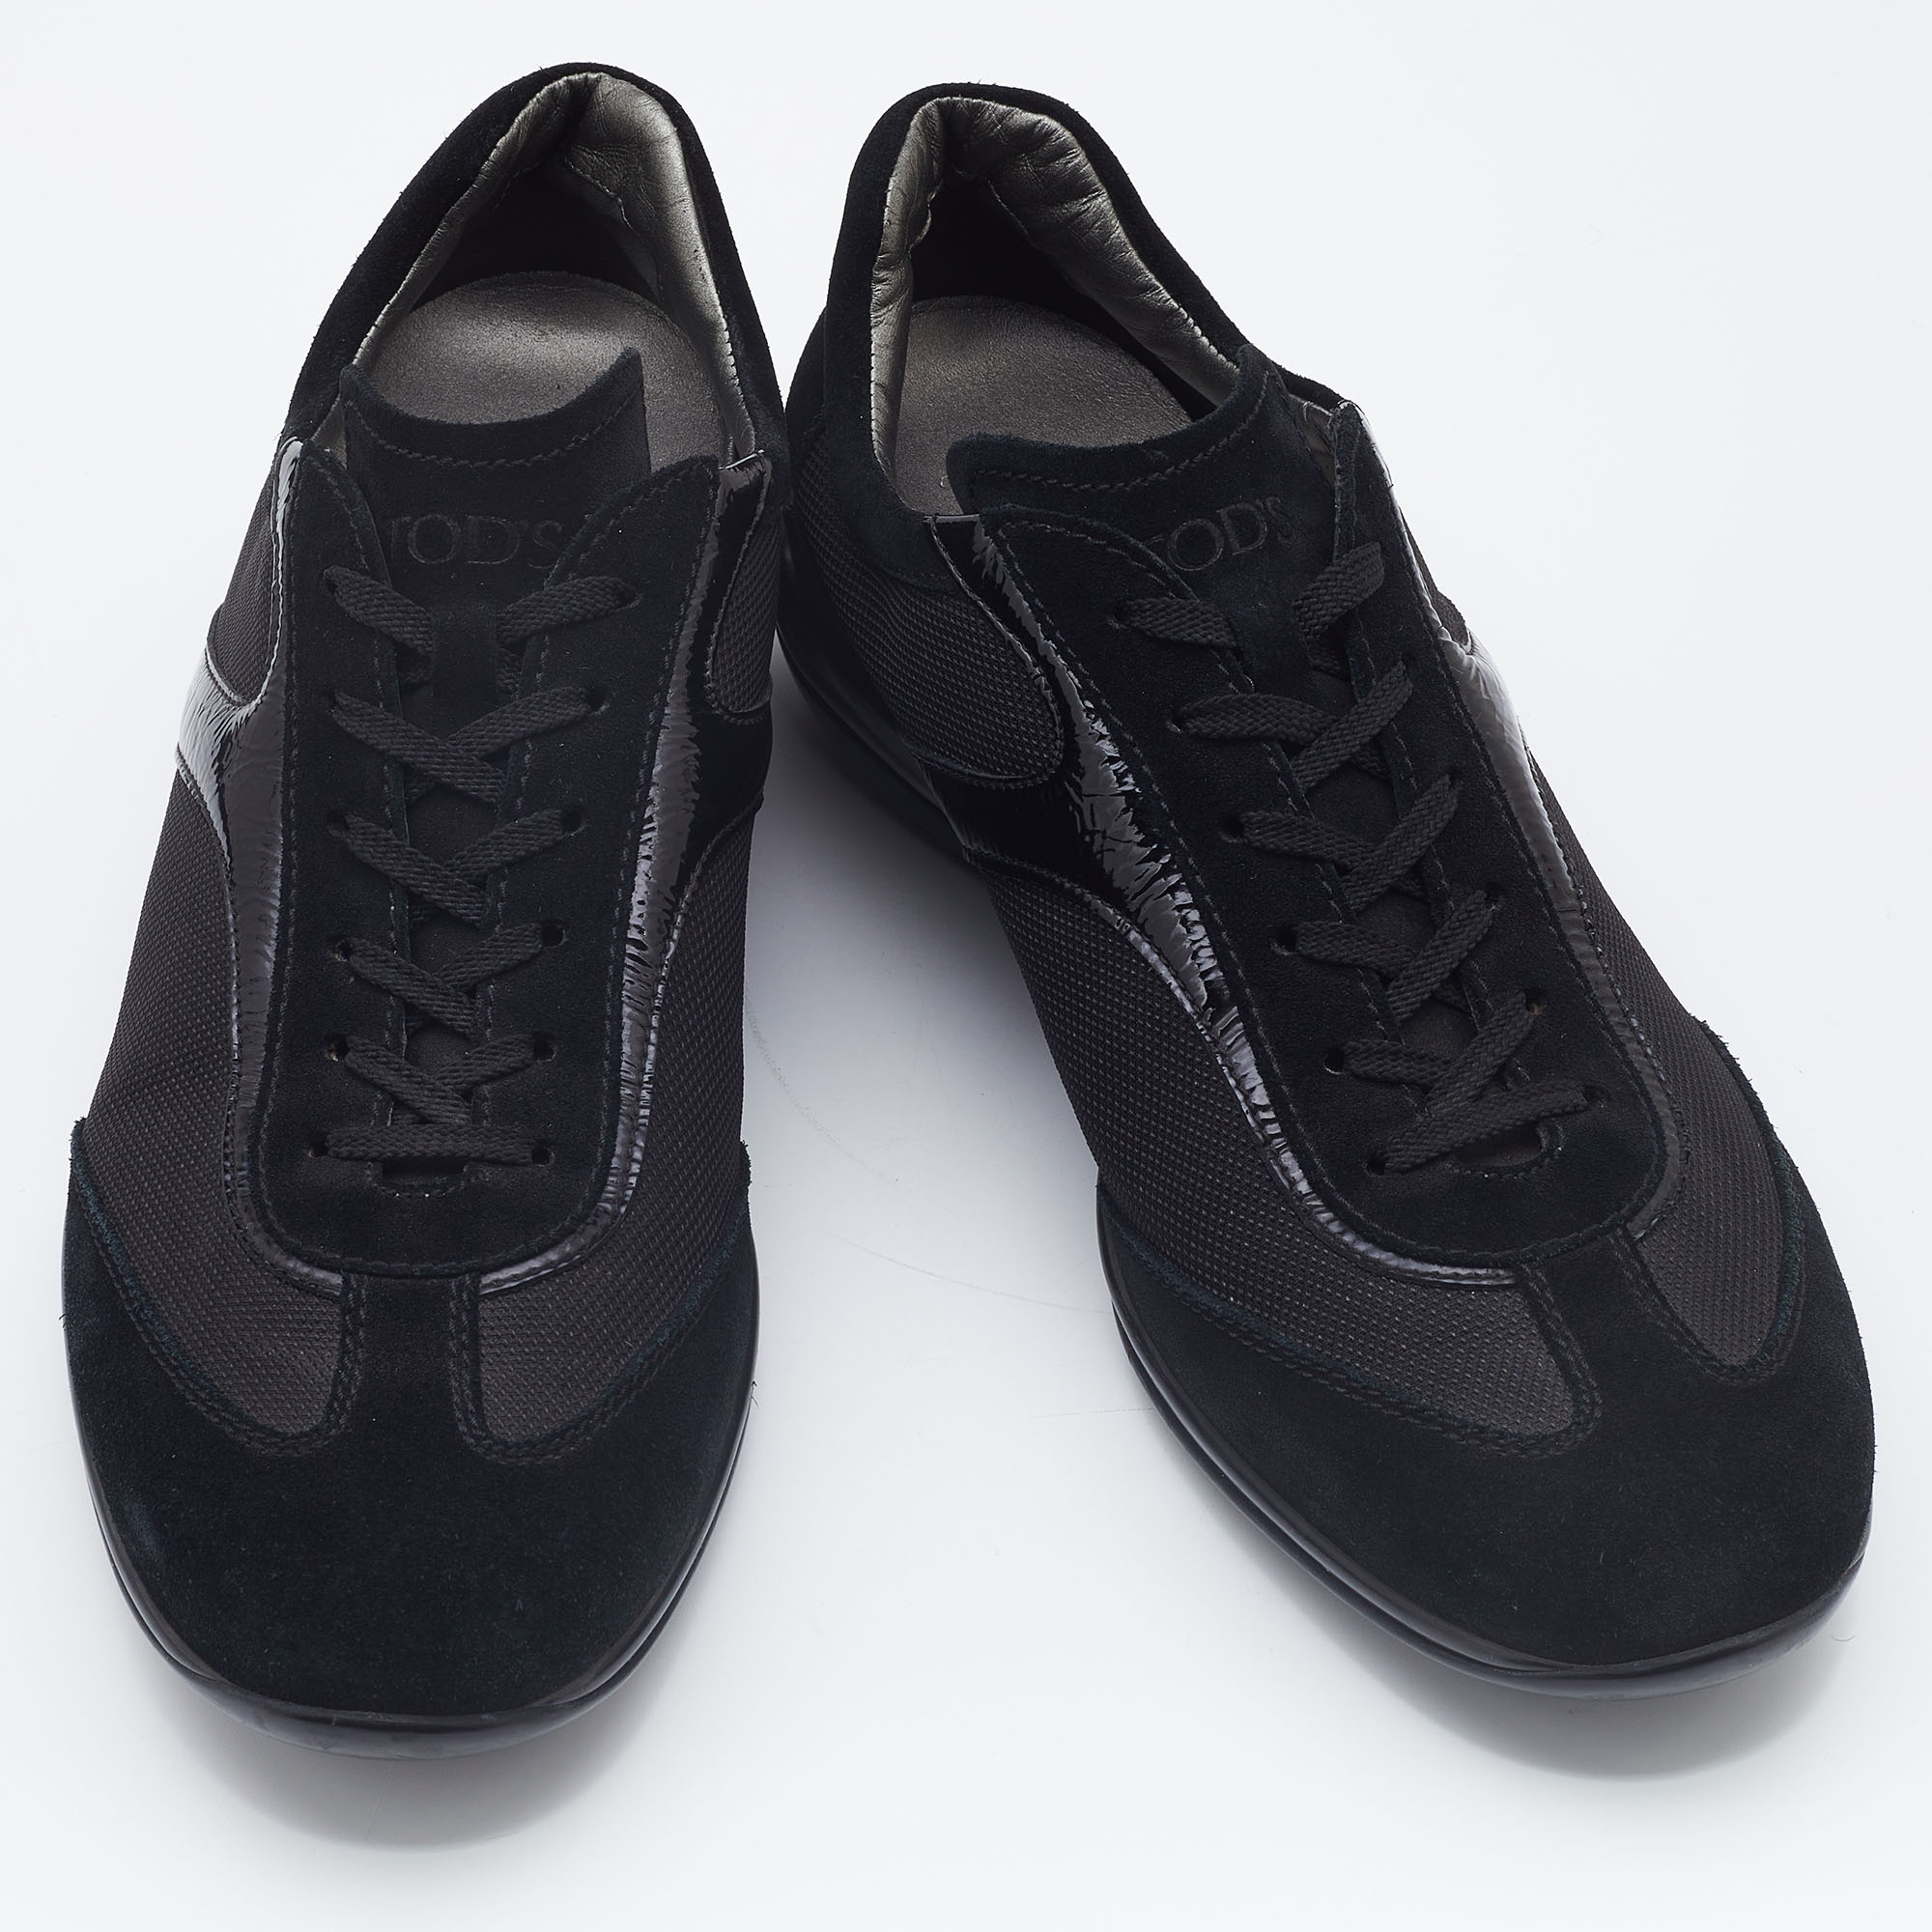 Tods Black Suede, Patent Leather And Mesh Low Top Sneakers Size 44